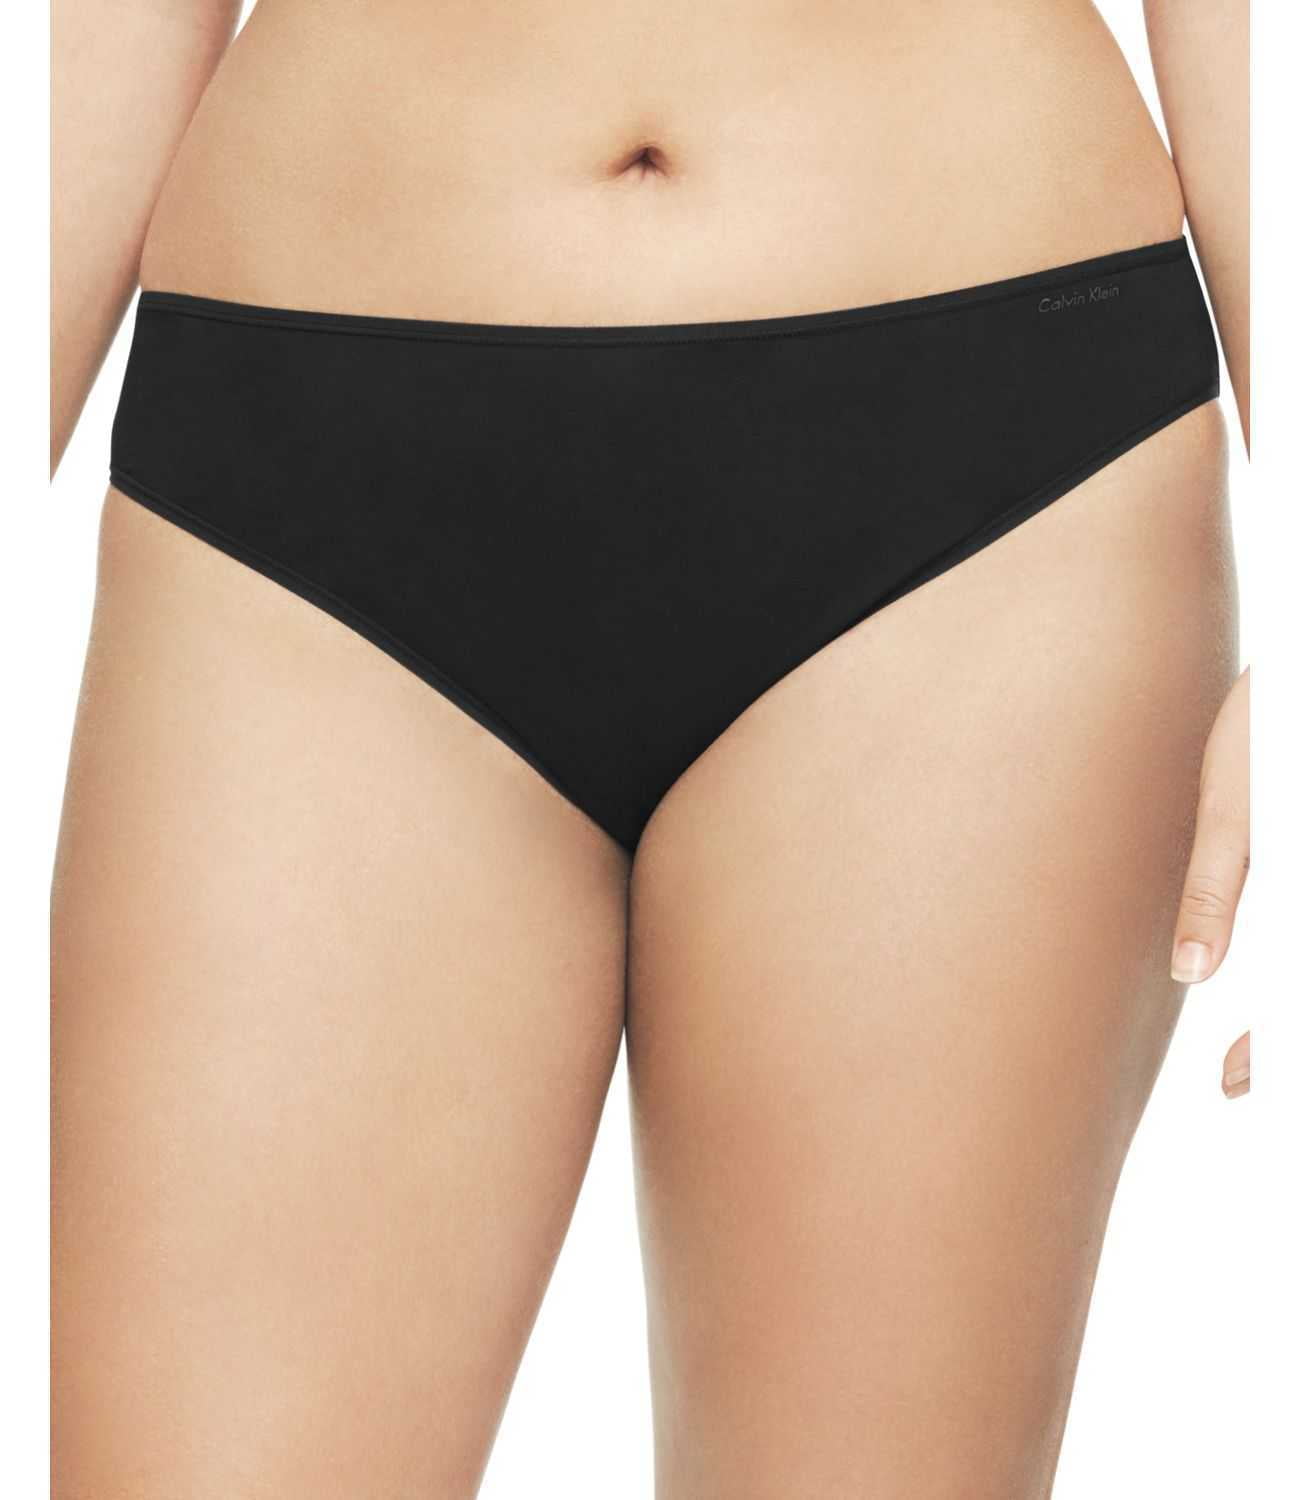 Calvin Klein Underwear 5-Pack Form Thong Black/Black/Bare/Bare/Connected, XS